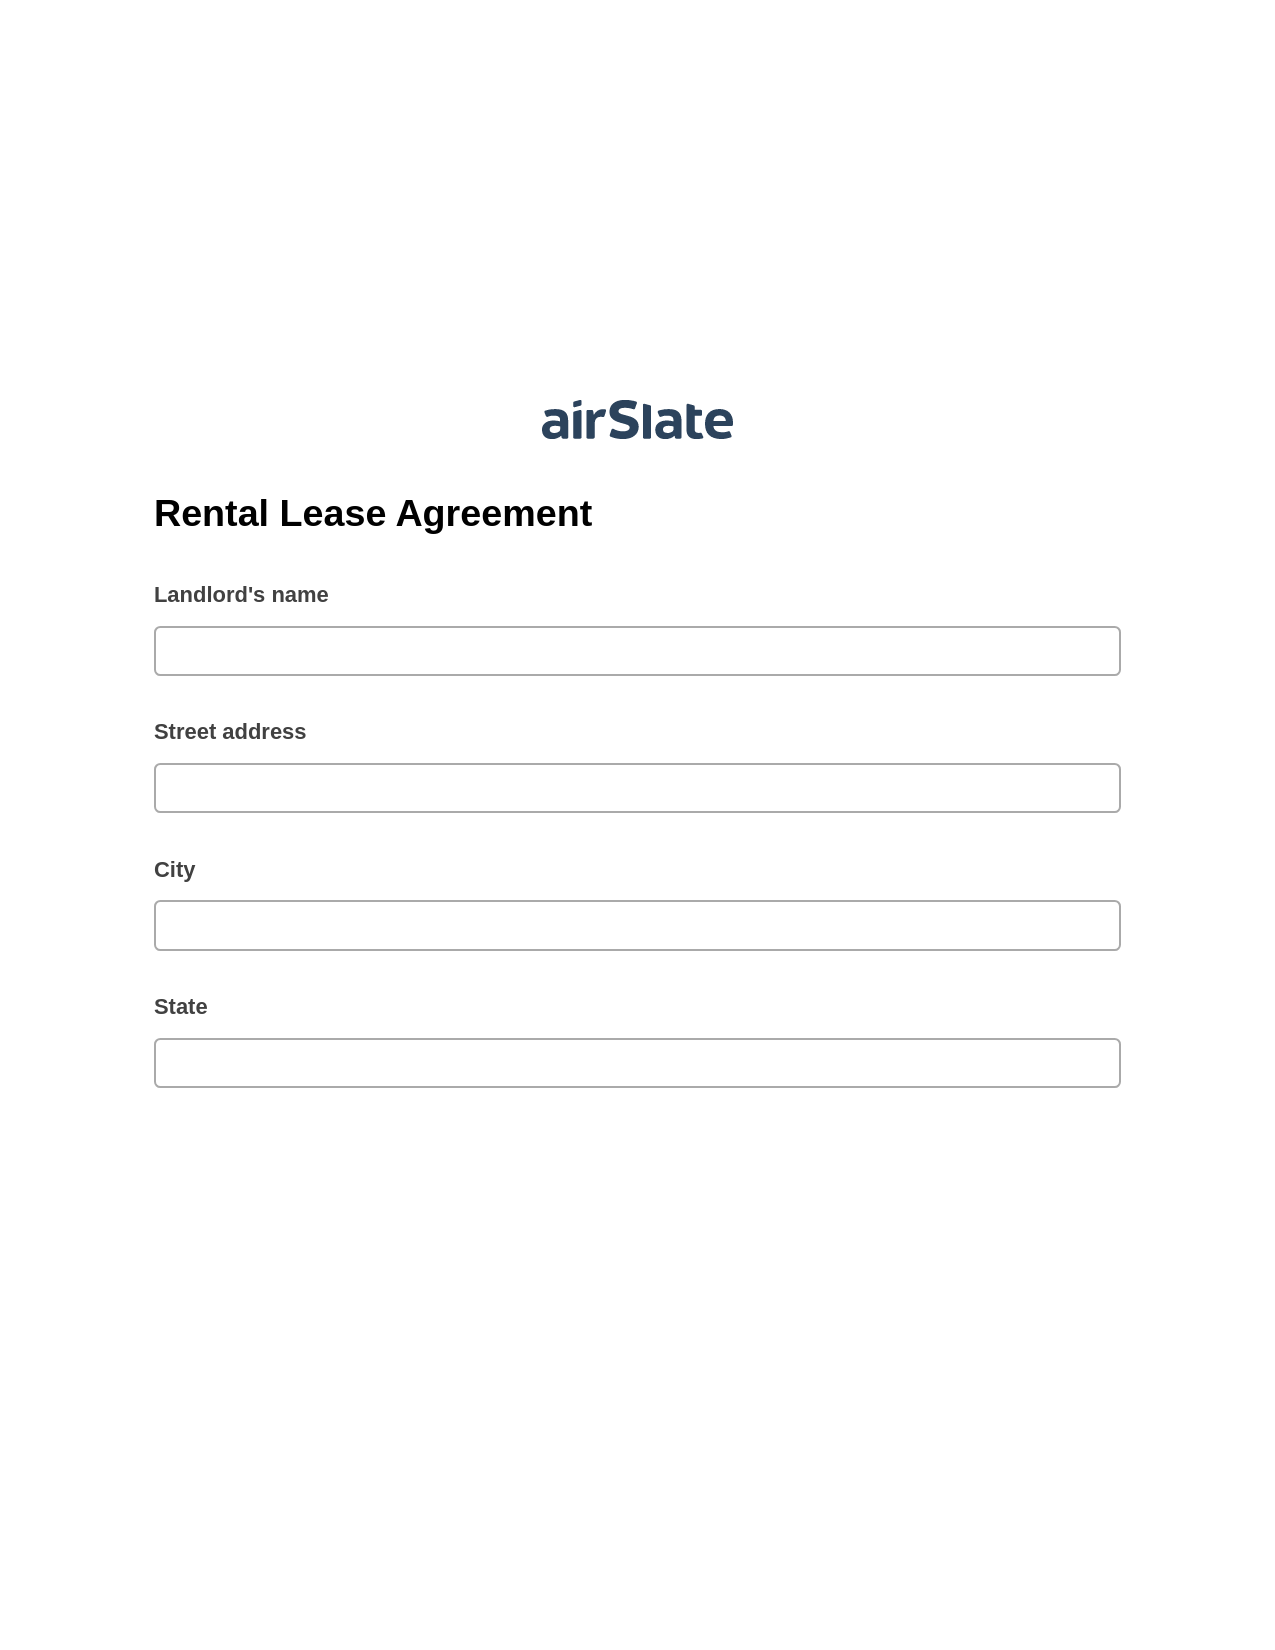 Rental Lease Agreement Pre-fill from Google Sheet Dropdown Options Bot, Roles Reminder Bot, Google Drive Bot